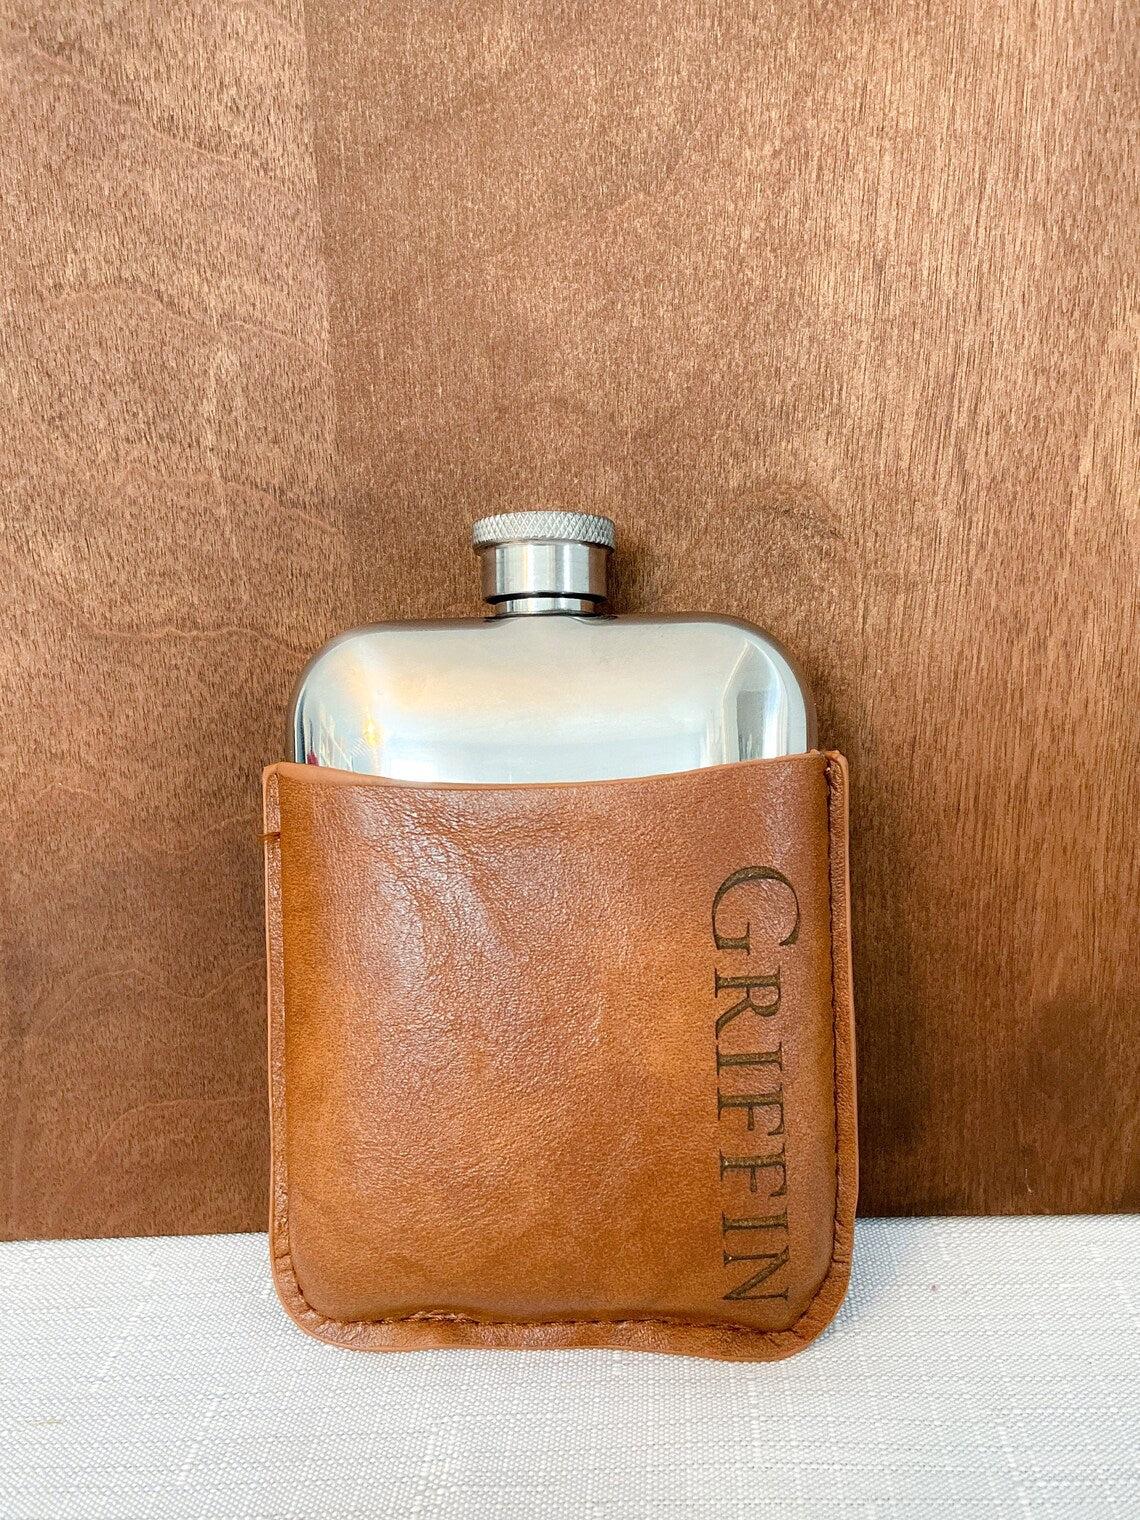 Flask set. A lovely gift for birthdays, Father's Day, or for the groomsmen at your wedding. Fill the flask with their favorite drink for a thoughtful surprise. Each personalized men's flask is custom laser engraved to your specifications and is made of stainless steel.